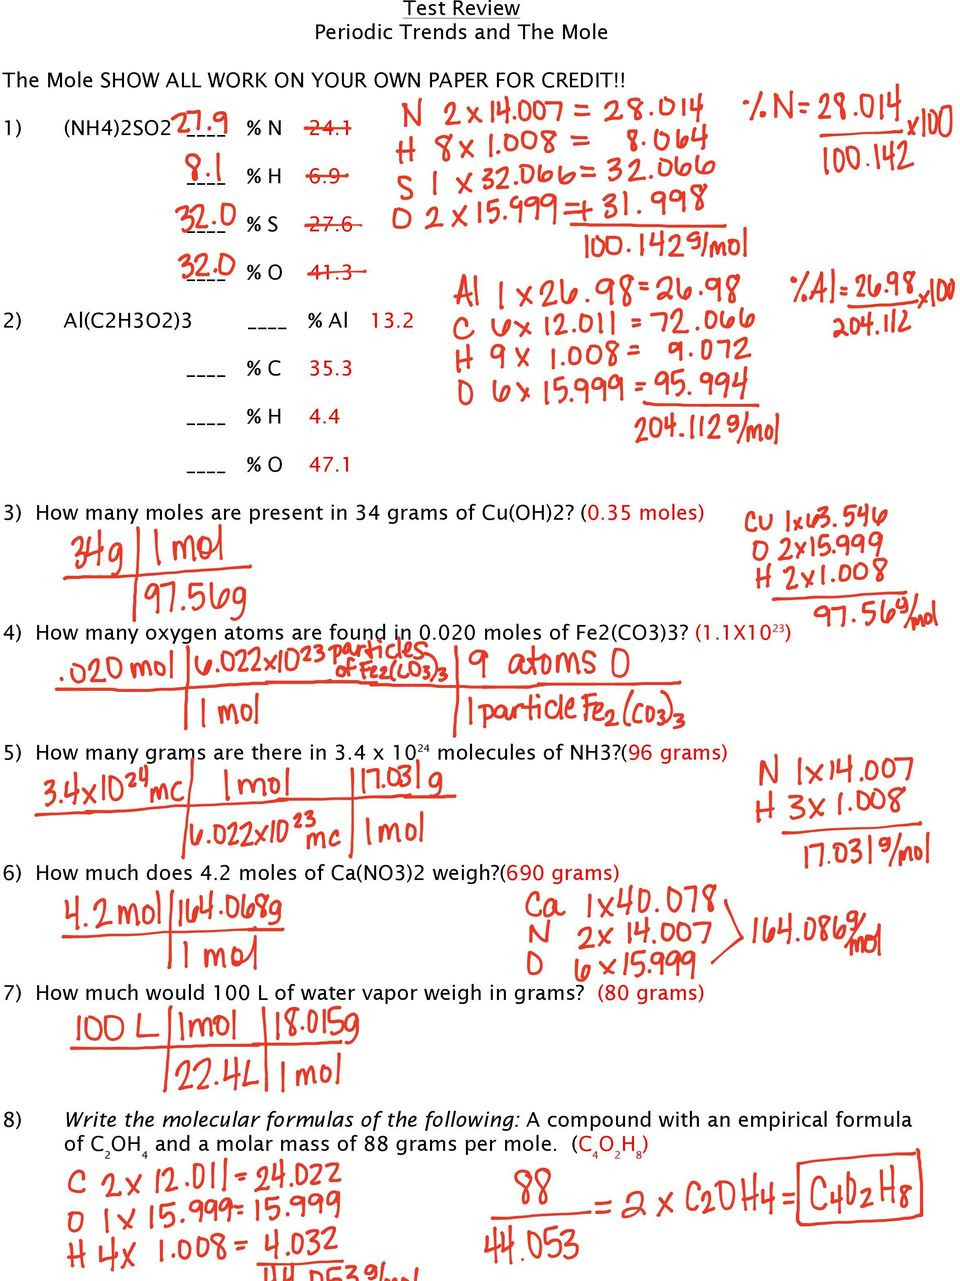 Periodic Trends Worksheet Answers Test Review Periodic Trends and the Mole Pdf Free Download